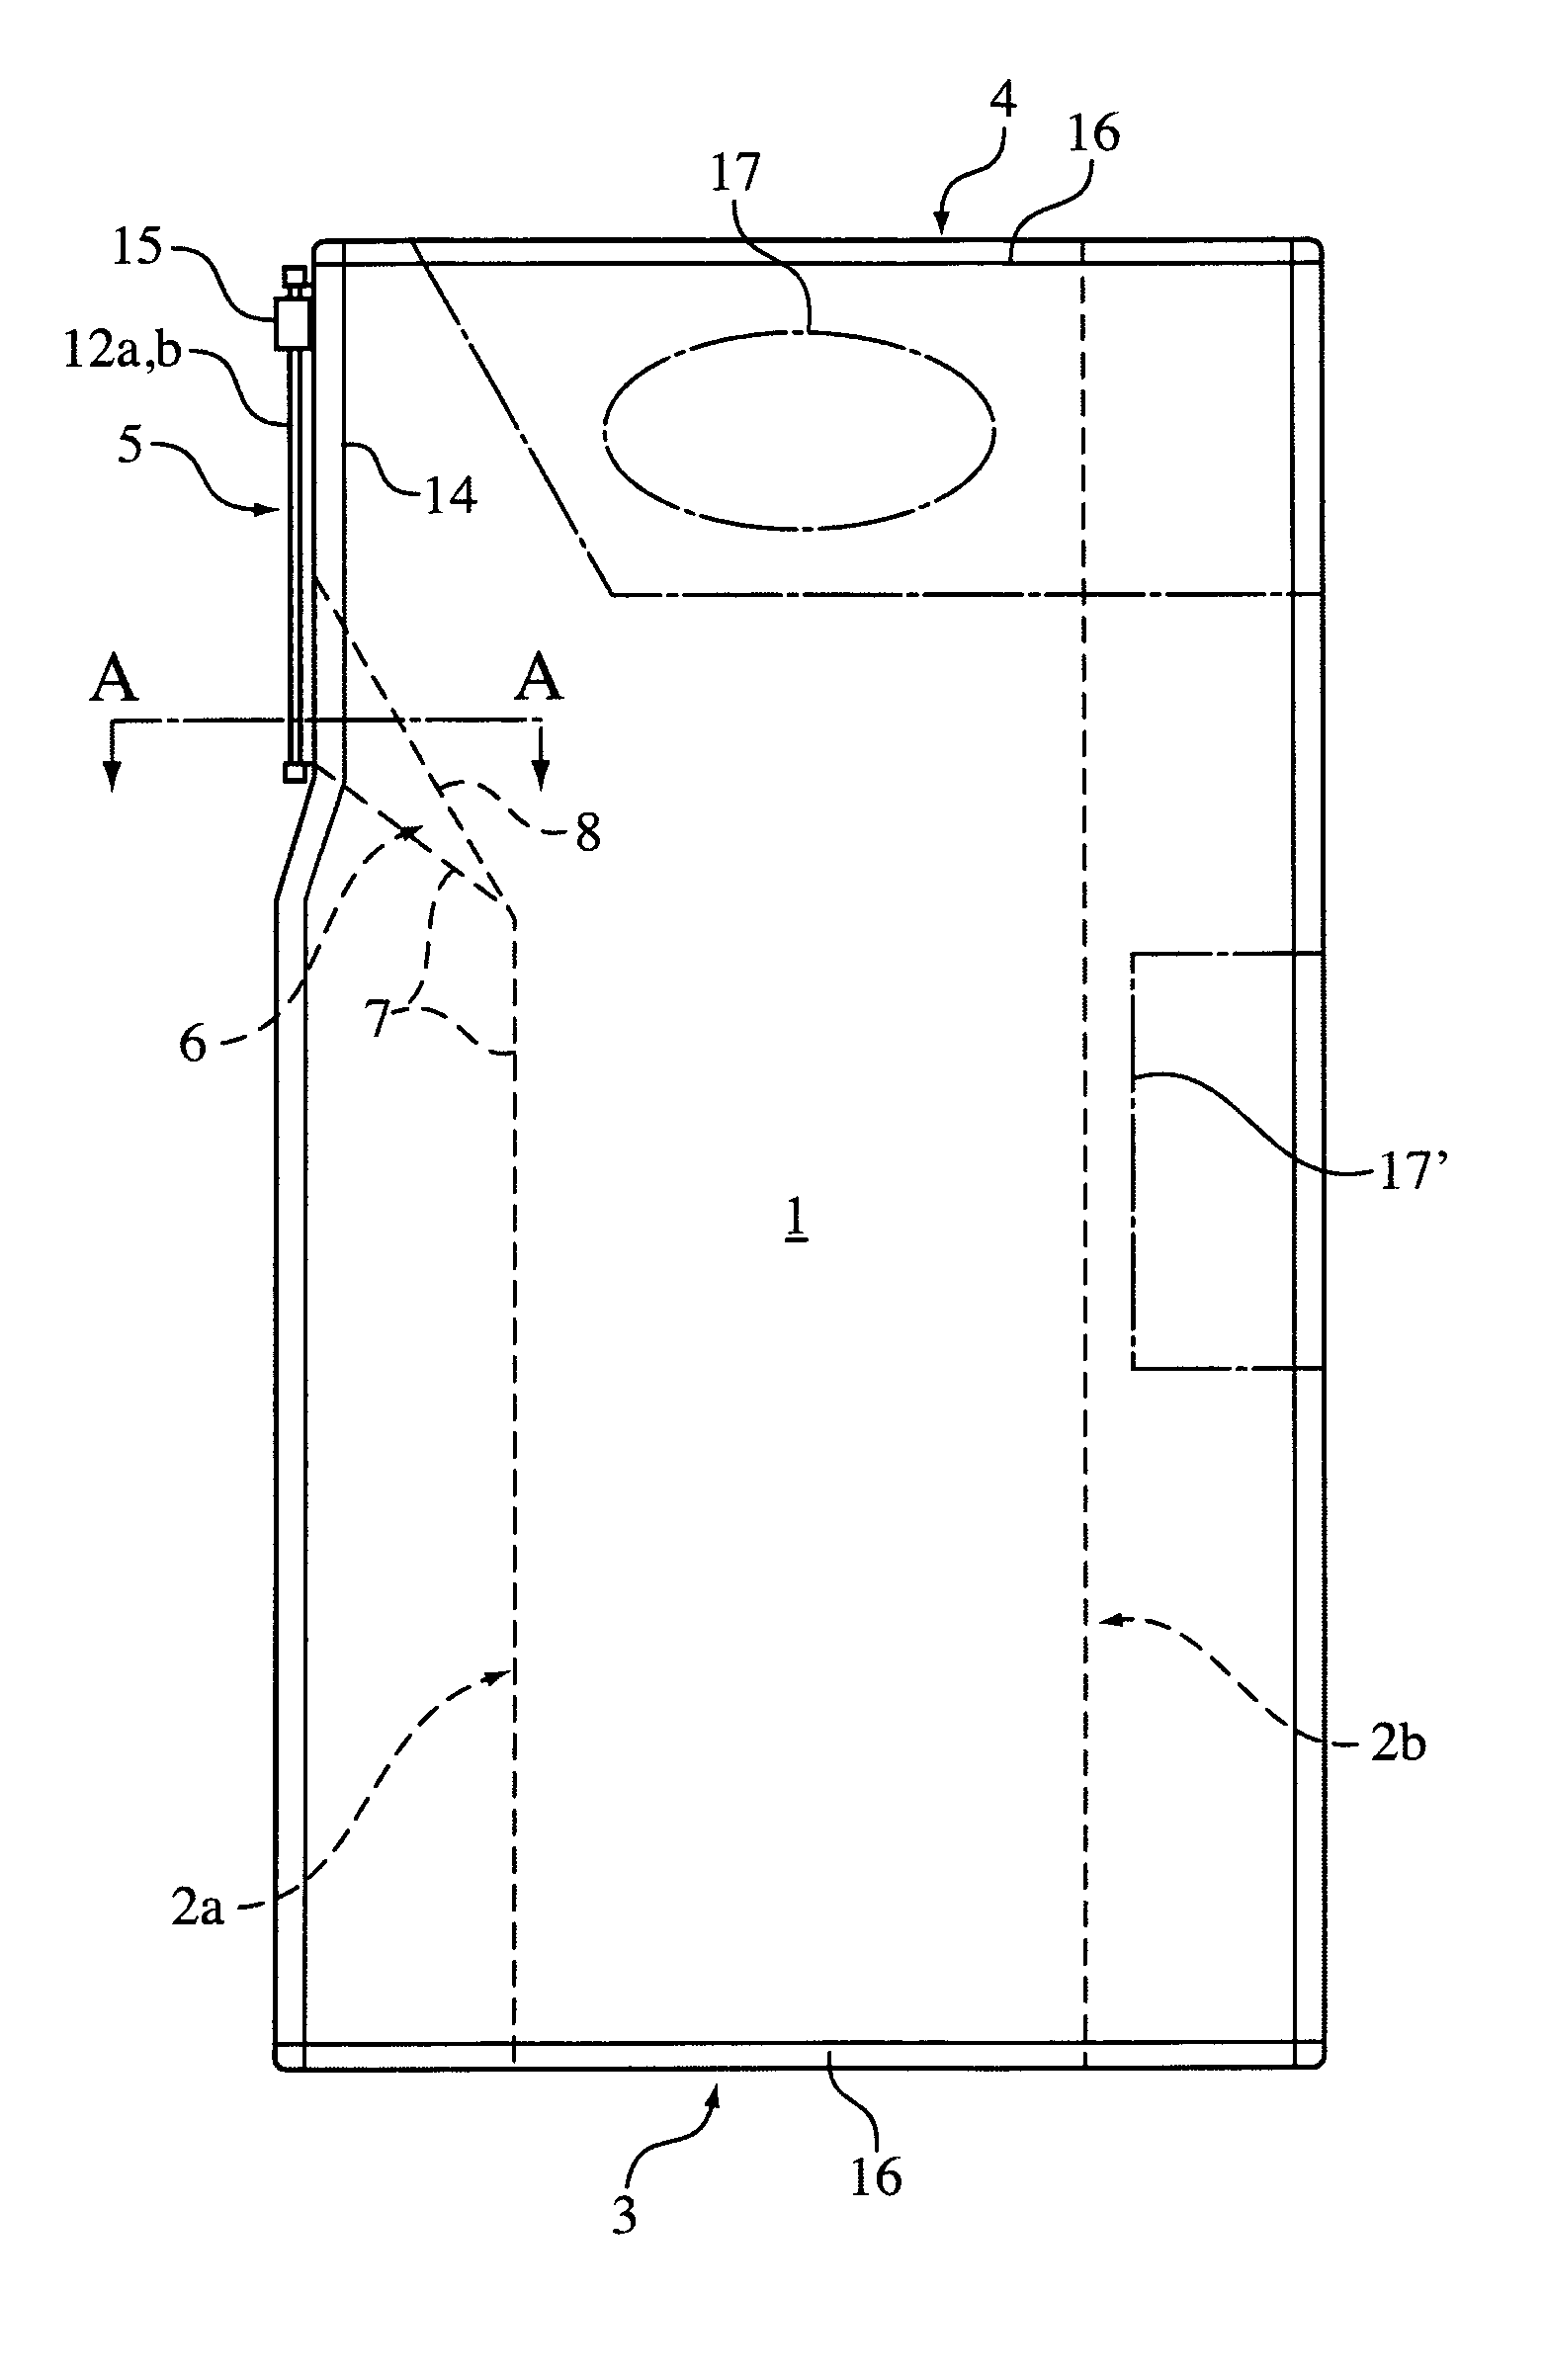 Side-gusseted bag and method for manufacturing same